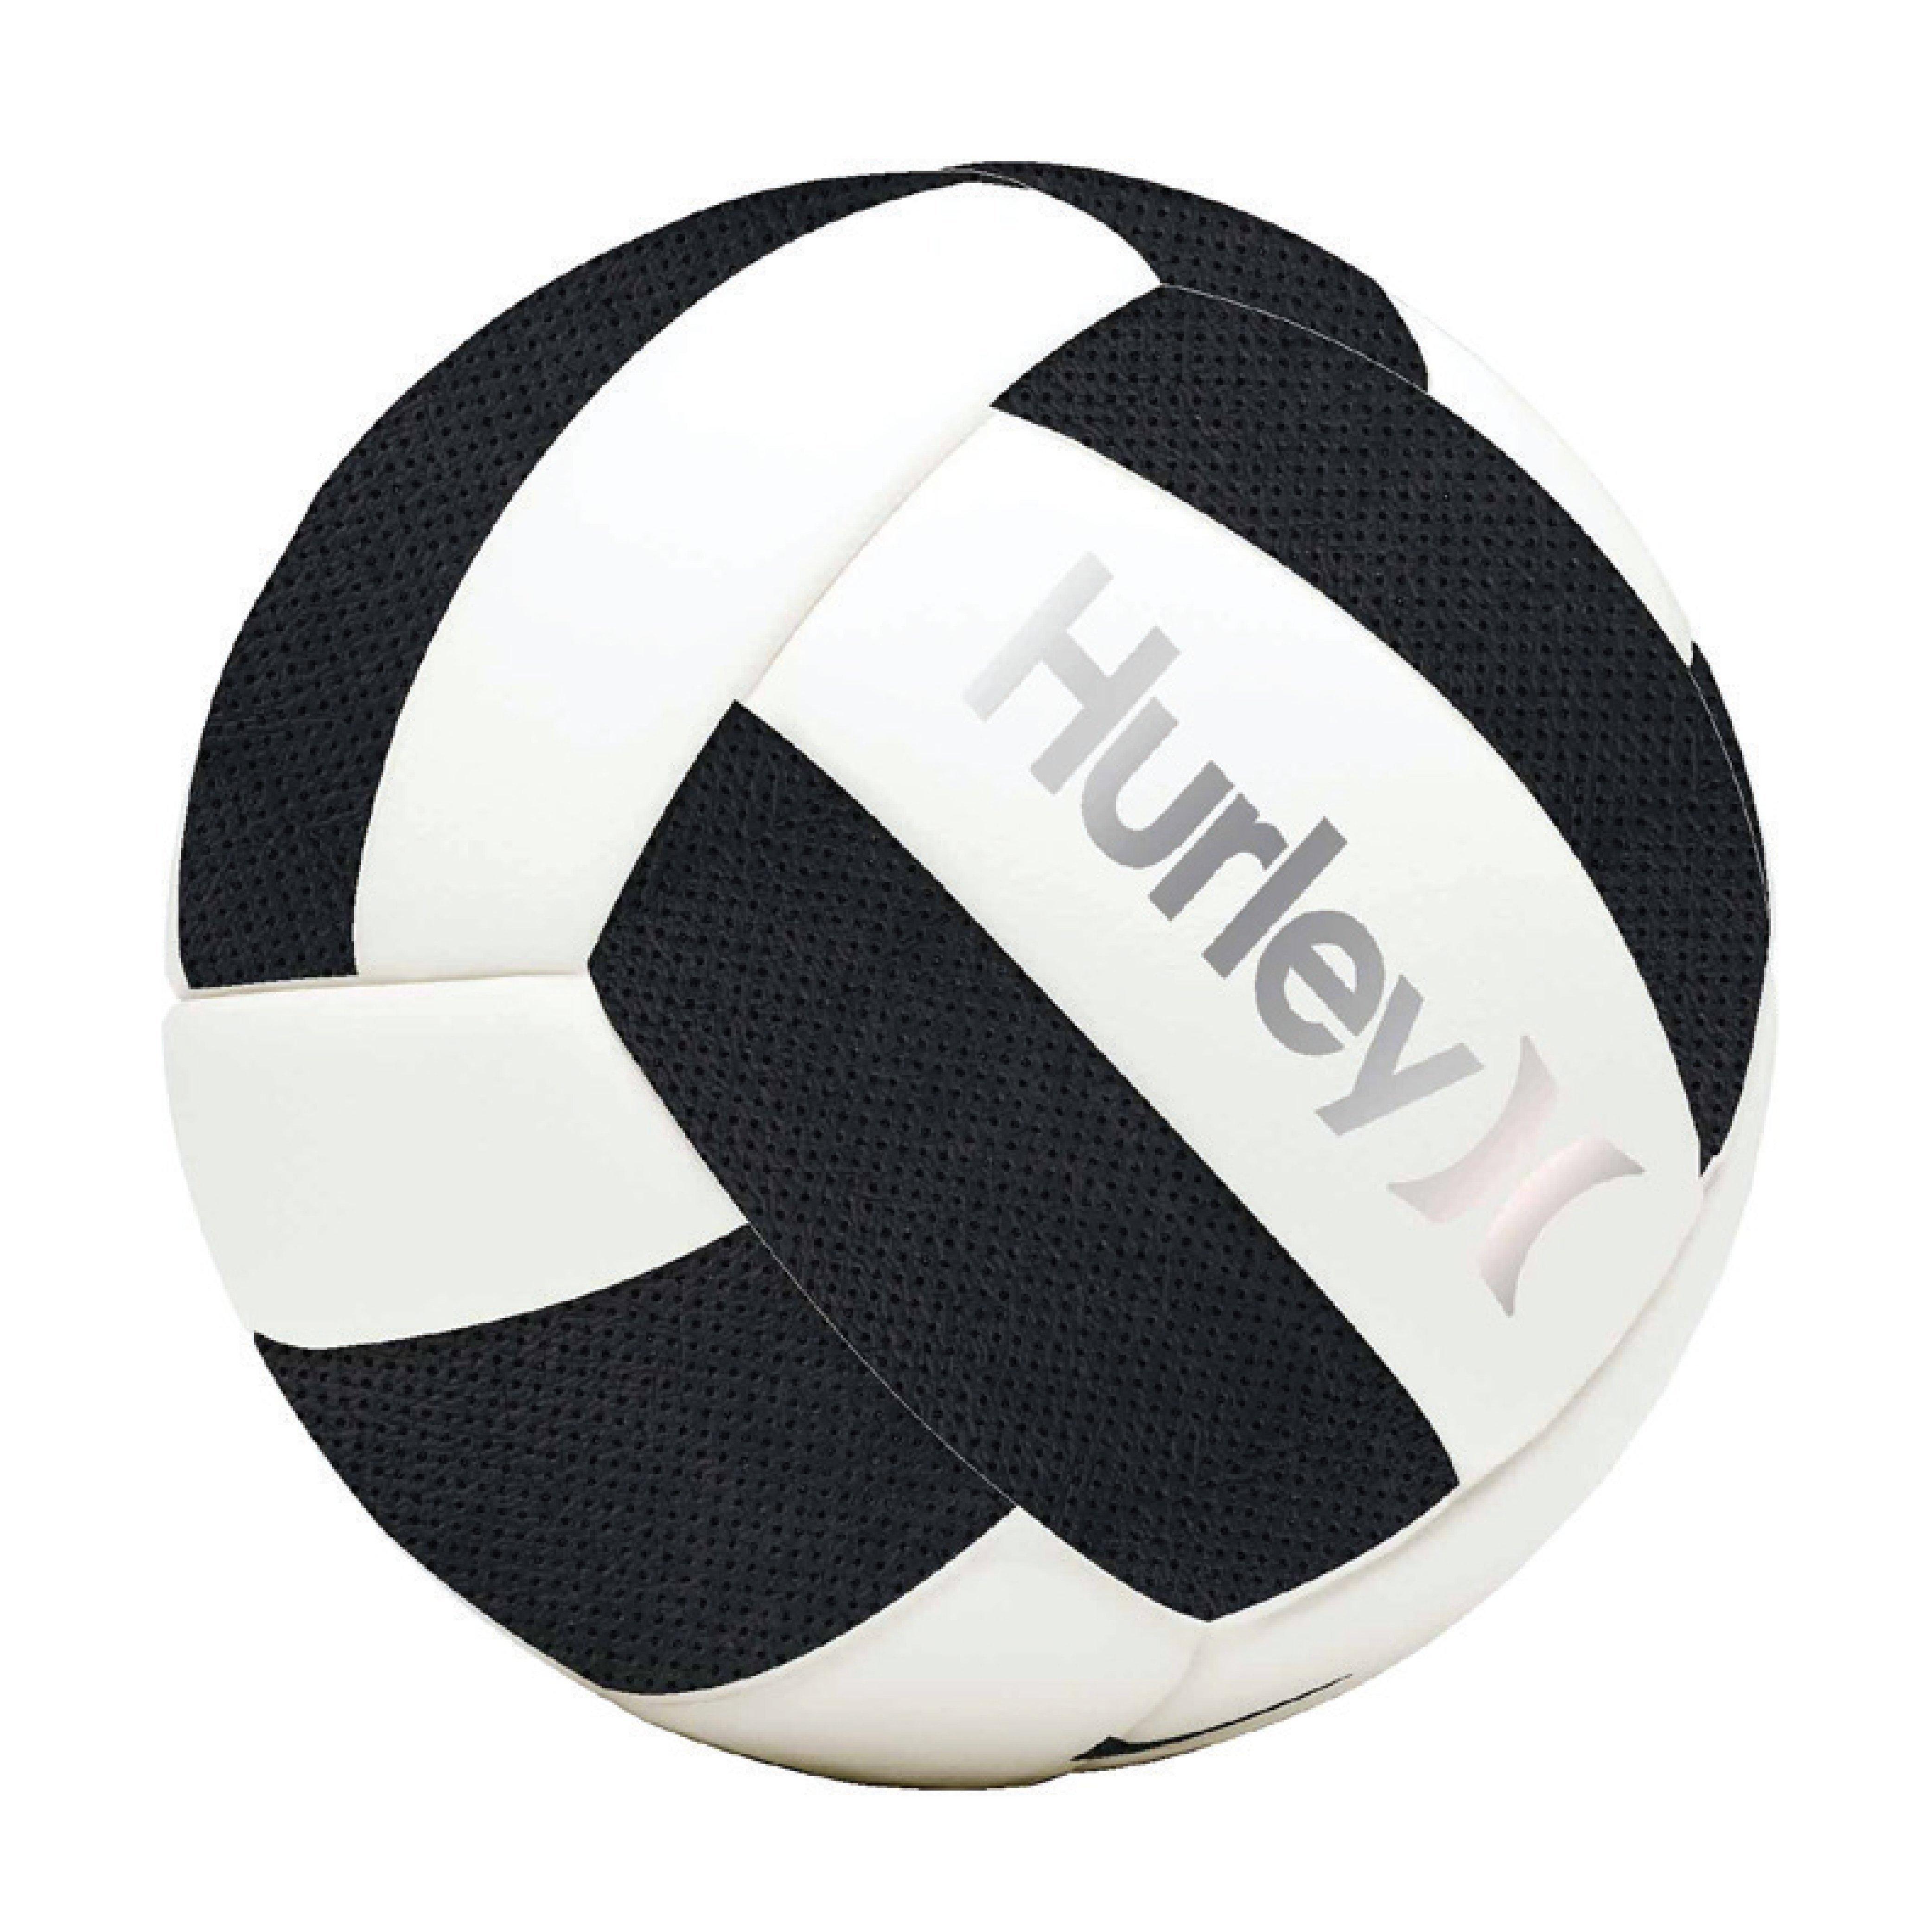 Hurley  Size 5 Black and White Premium Soft Touch Volleyball